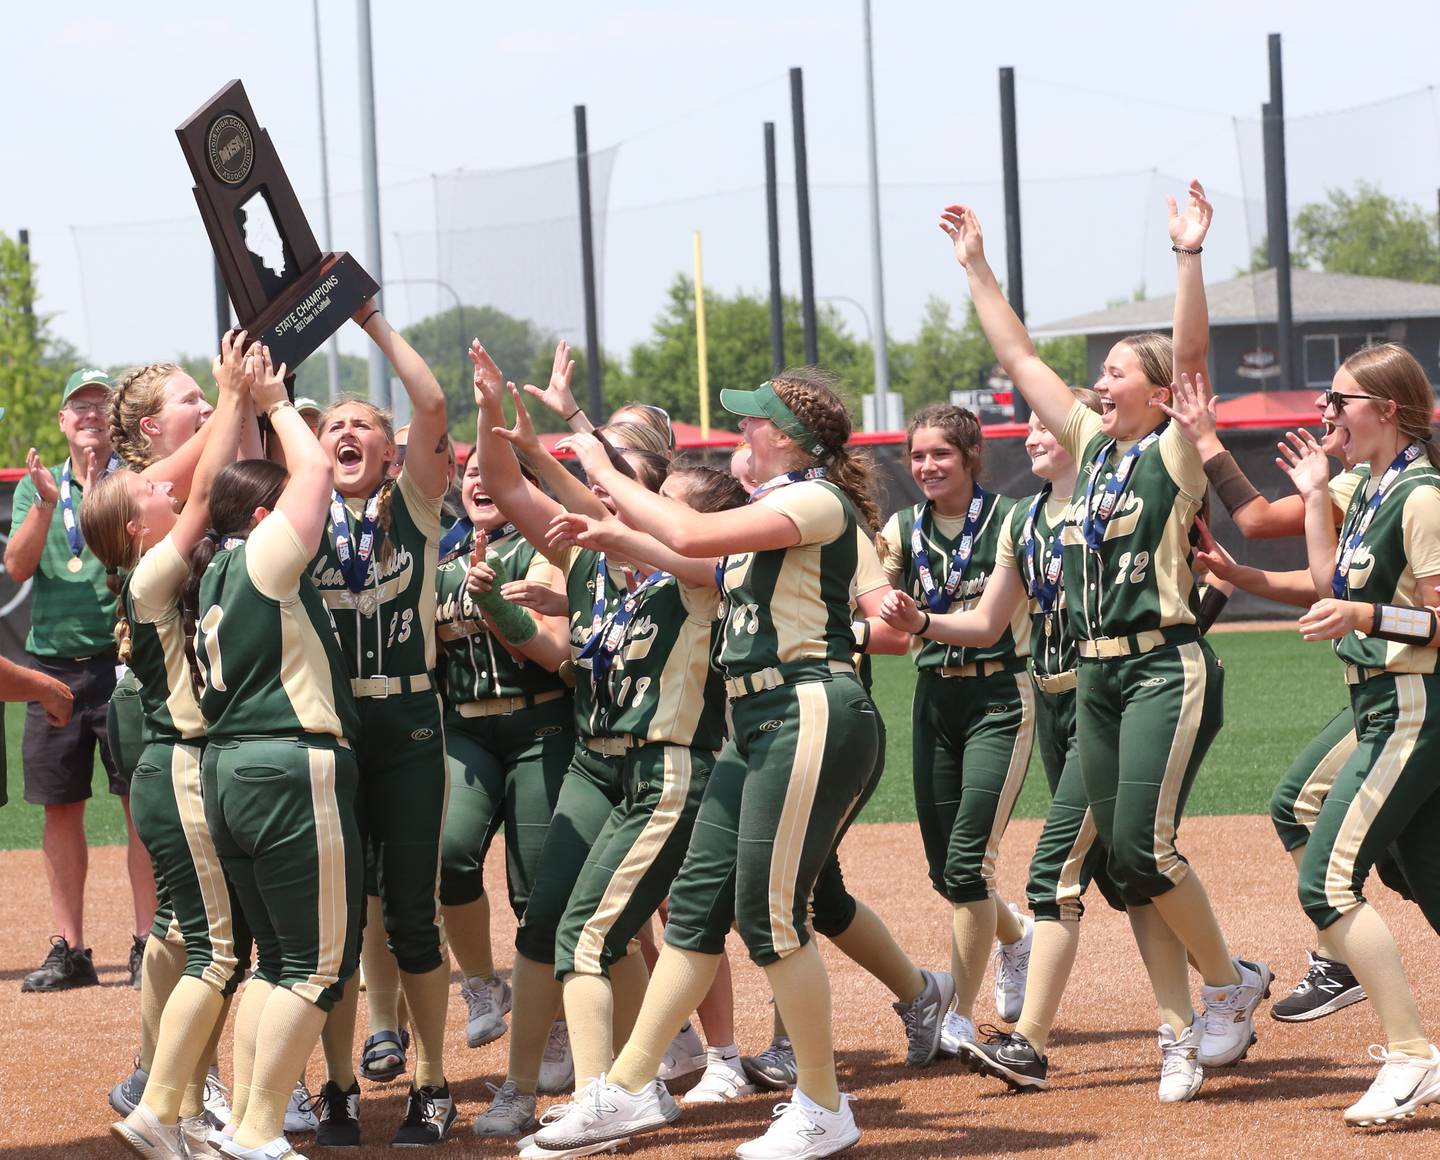 Members of the St. Bede softball team hoist the Class 1A State championship trophy after defeating Illini Bluffs on Saturday, June 3, 2023 at the Louisville Slugger Sports Complex in Peoria.